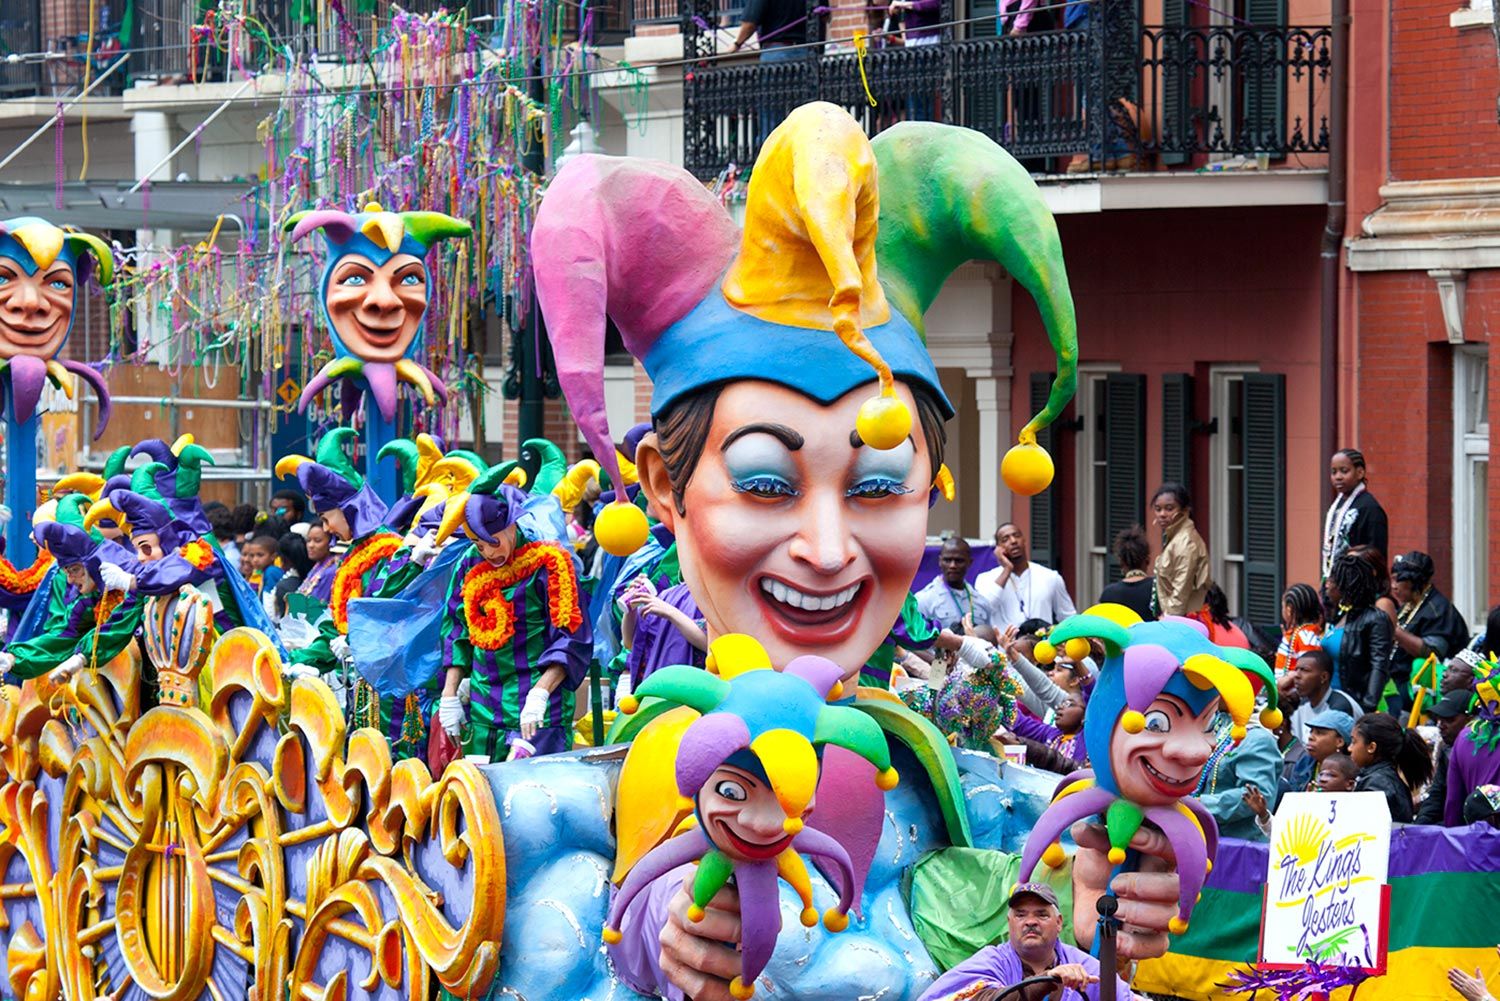 What Happened on February 27th Mardi Gras Comes to New Orleans IF I